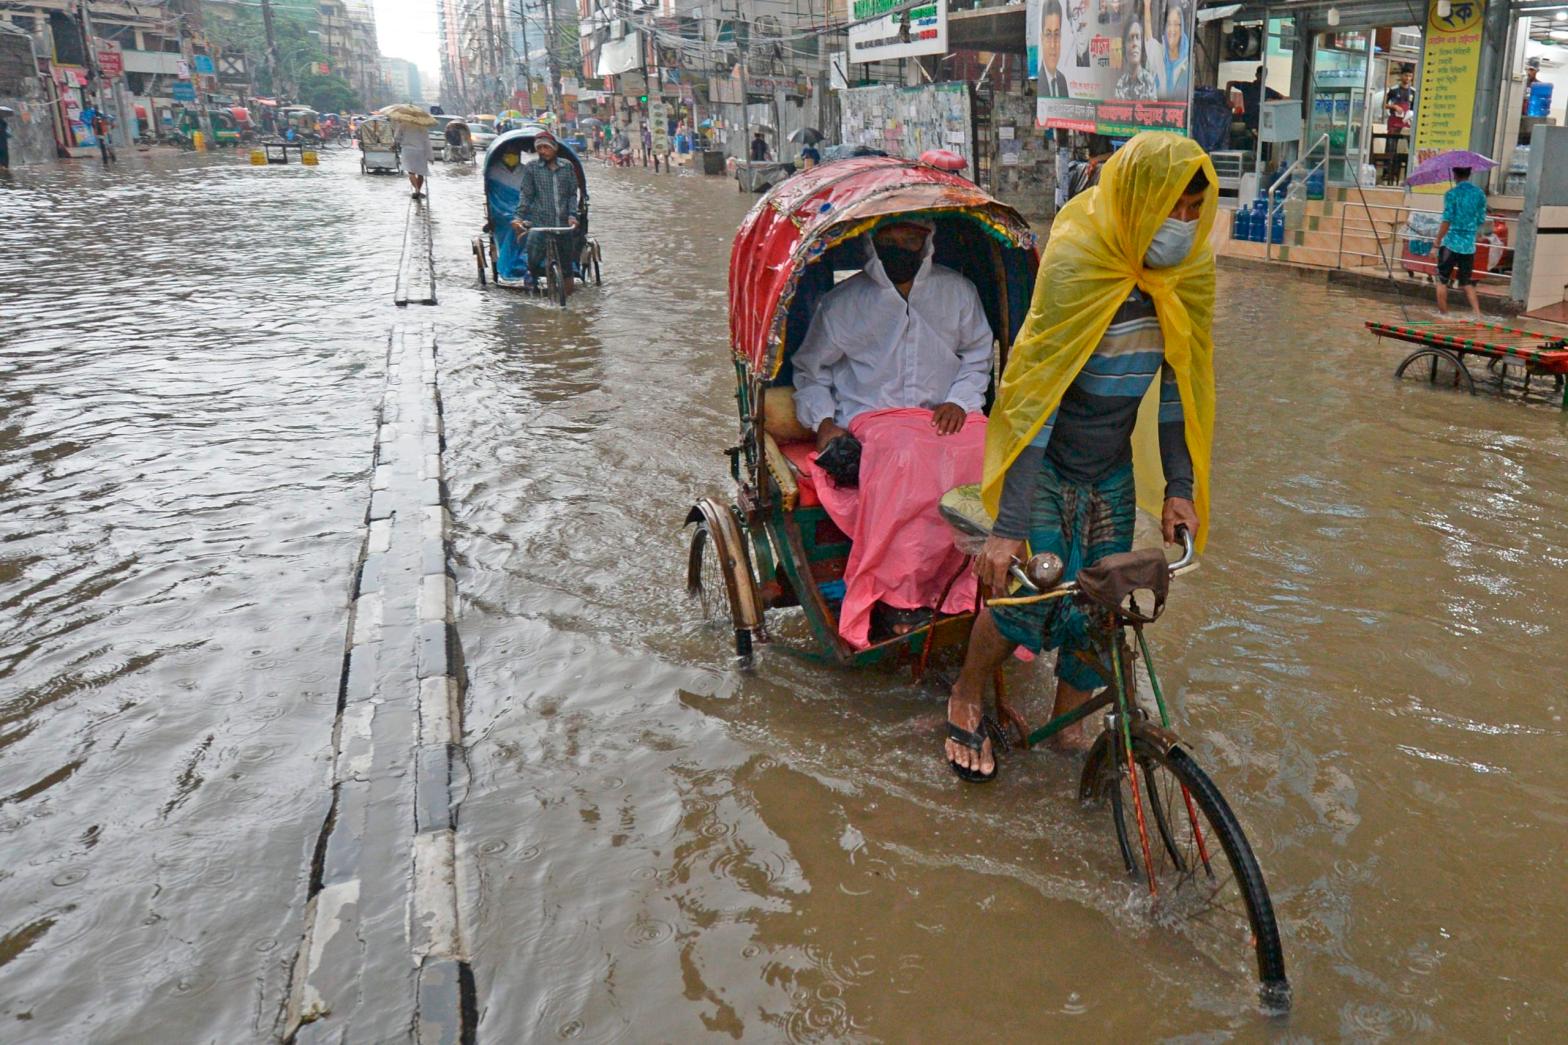 Rickshaw pullers make their way through a water-logged street after a heavy downpour in Dhaka on June 21, 2020. (Photo: Munir Uz Zaman, Getty Images)